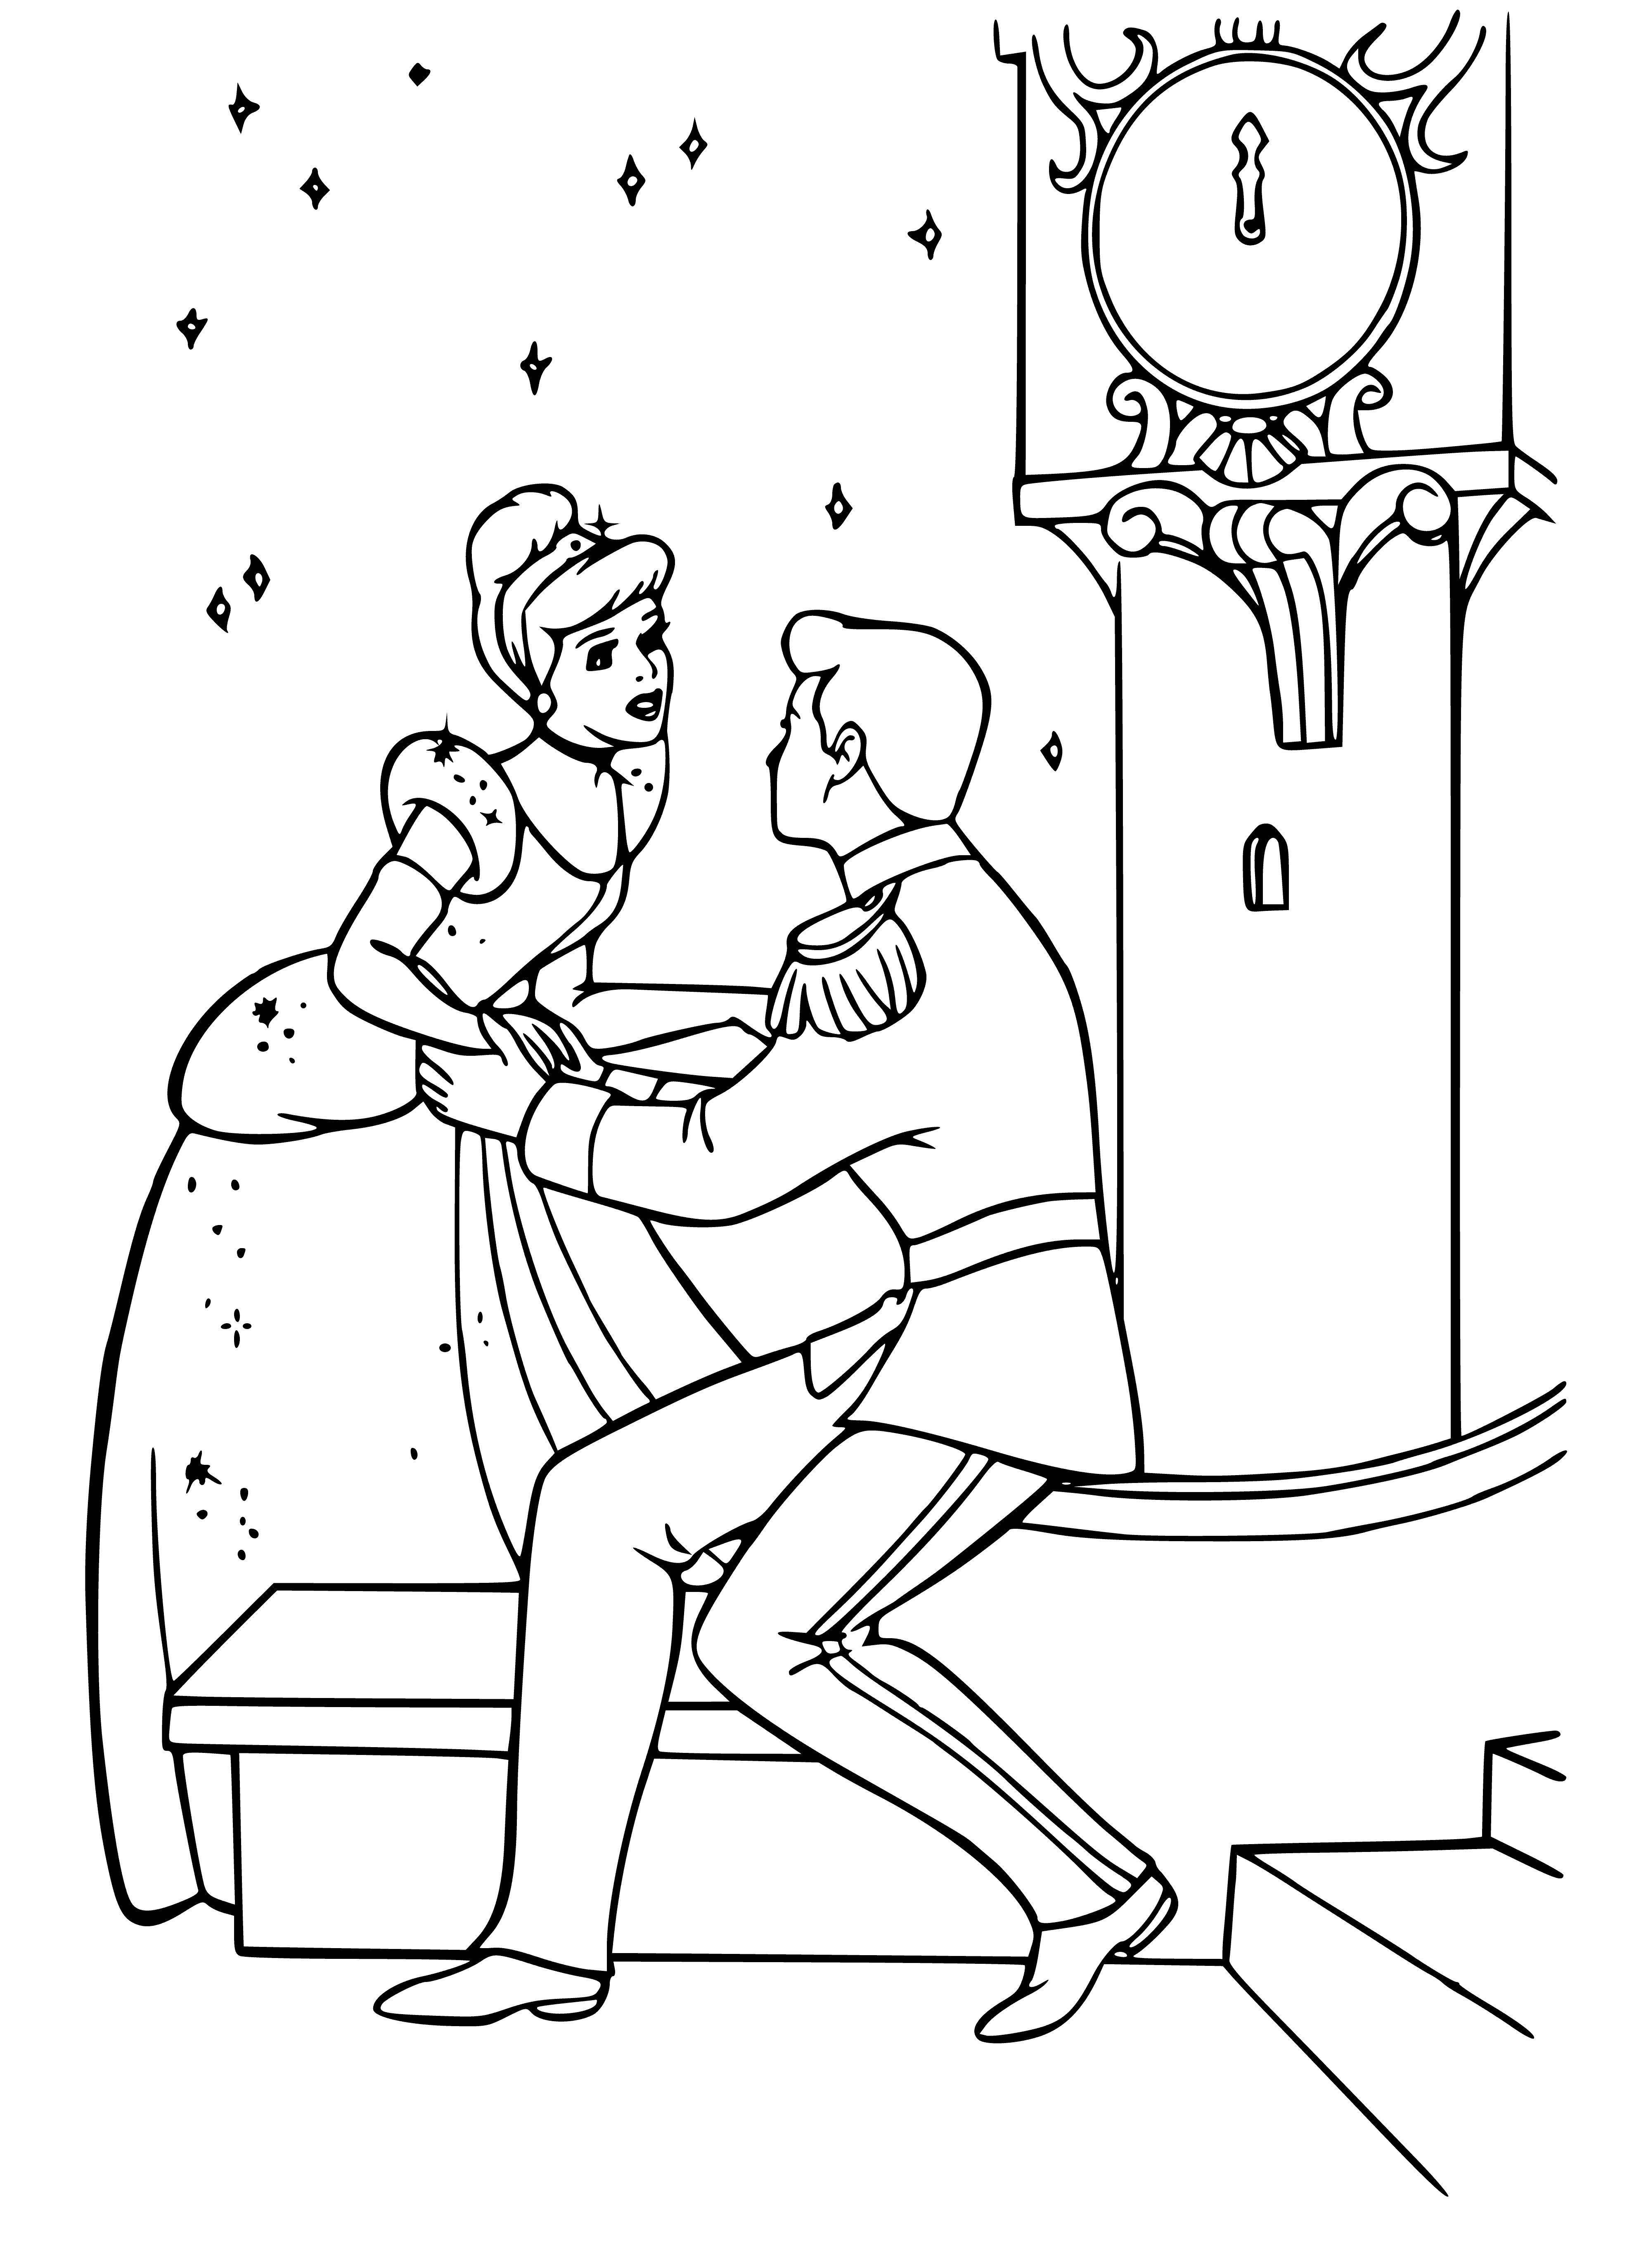 coloring page: Cinderella's magical dress turns to rags when midnight strikes, so she runs from the Prince in terror.